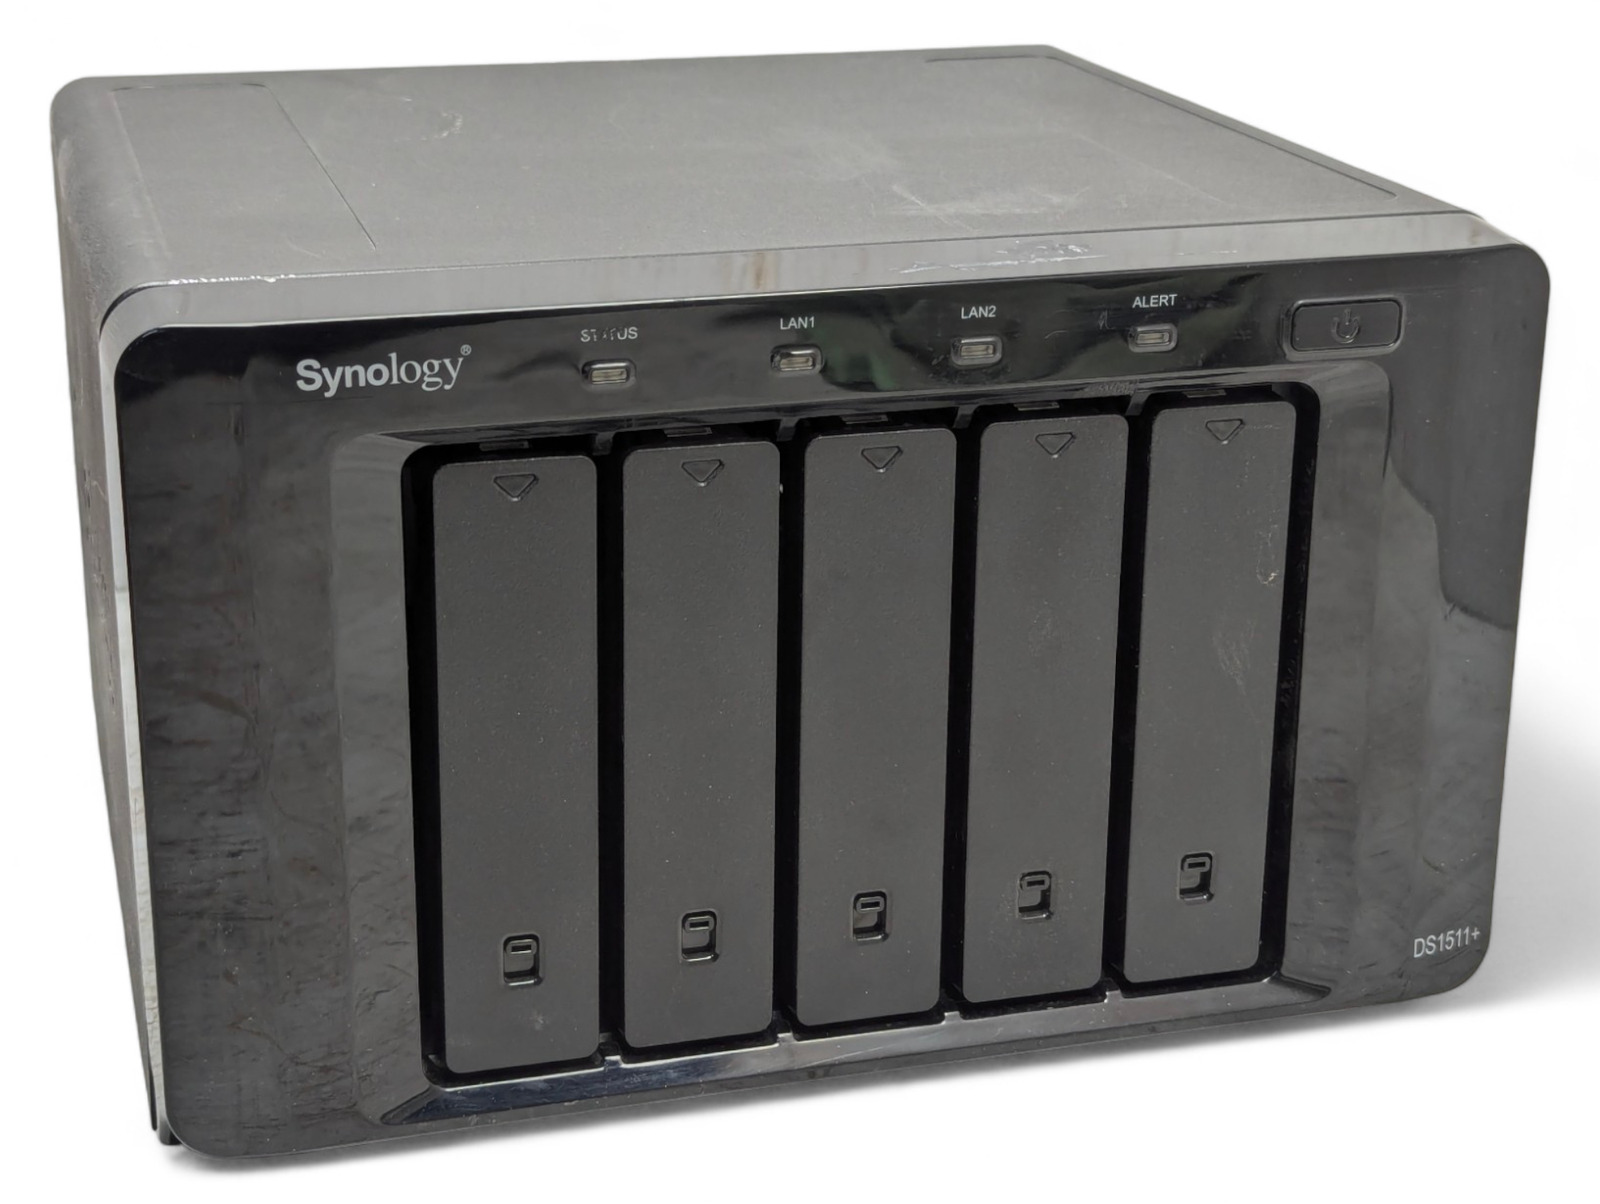 Synology 5 bay NAS DiskStation DS1511+ with 2 3TB HDDs and caddies  -